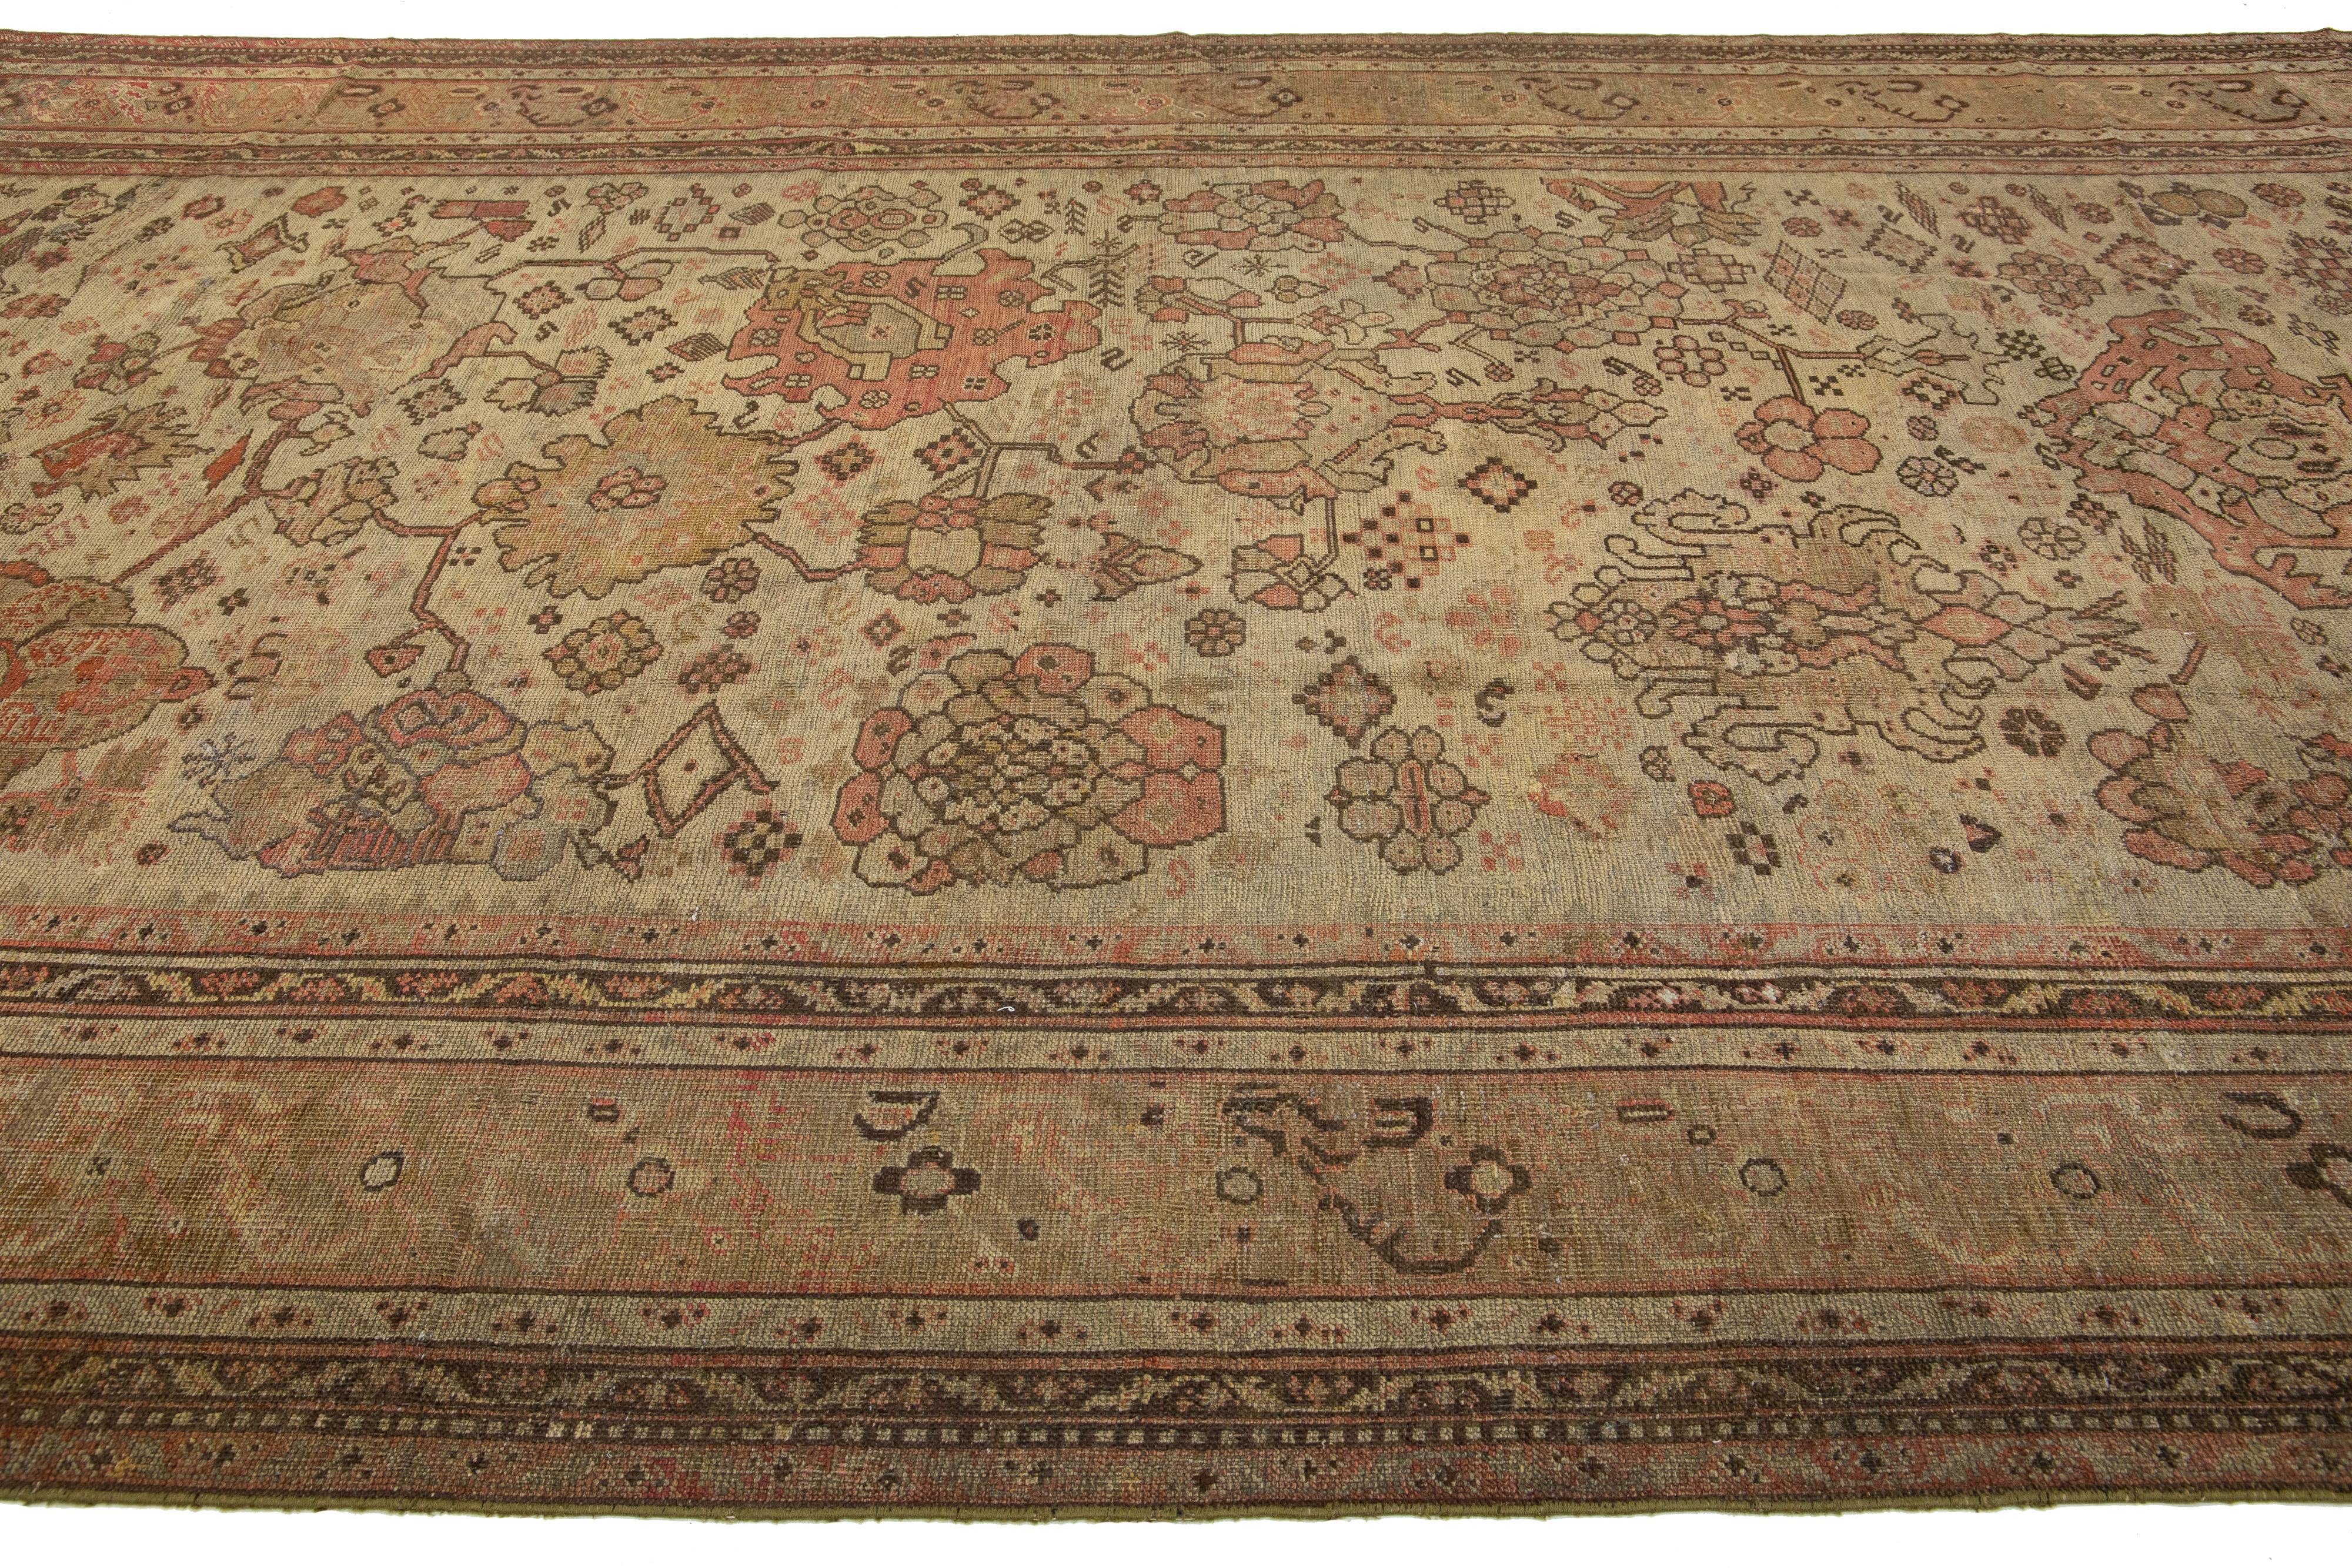 Late 19th Century Brown Turkish Antique Oushak Wool Rug with Allover Floral Motif From The 1890's For Sale